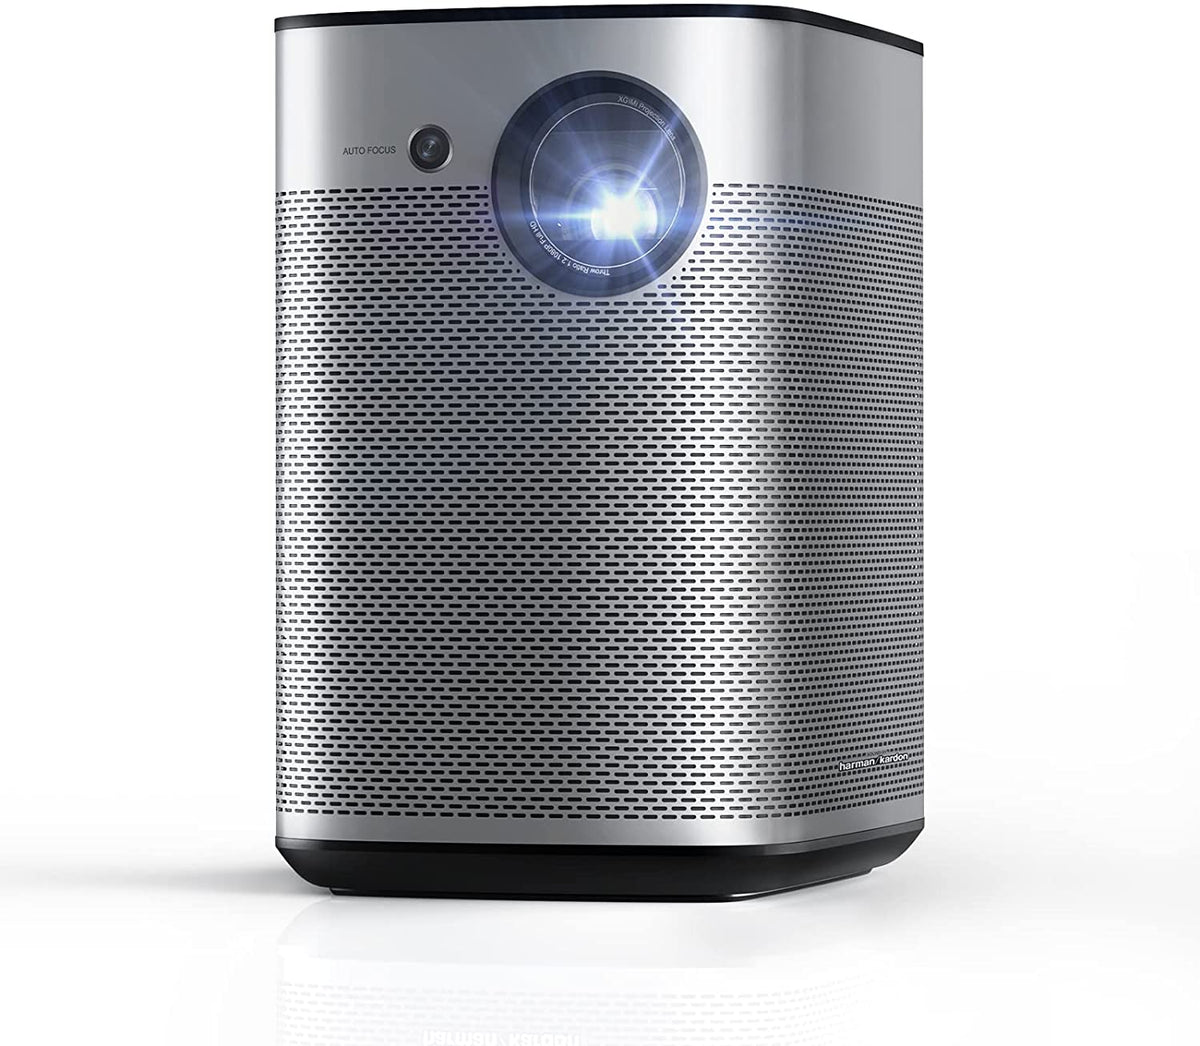 XGIMI Halo Portable Projector 4K Supported, Native 1080p 800 ANSI Lumen,  Harman Kardon Speaker, for Home & Outdoor